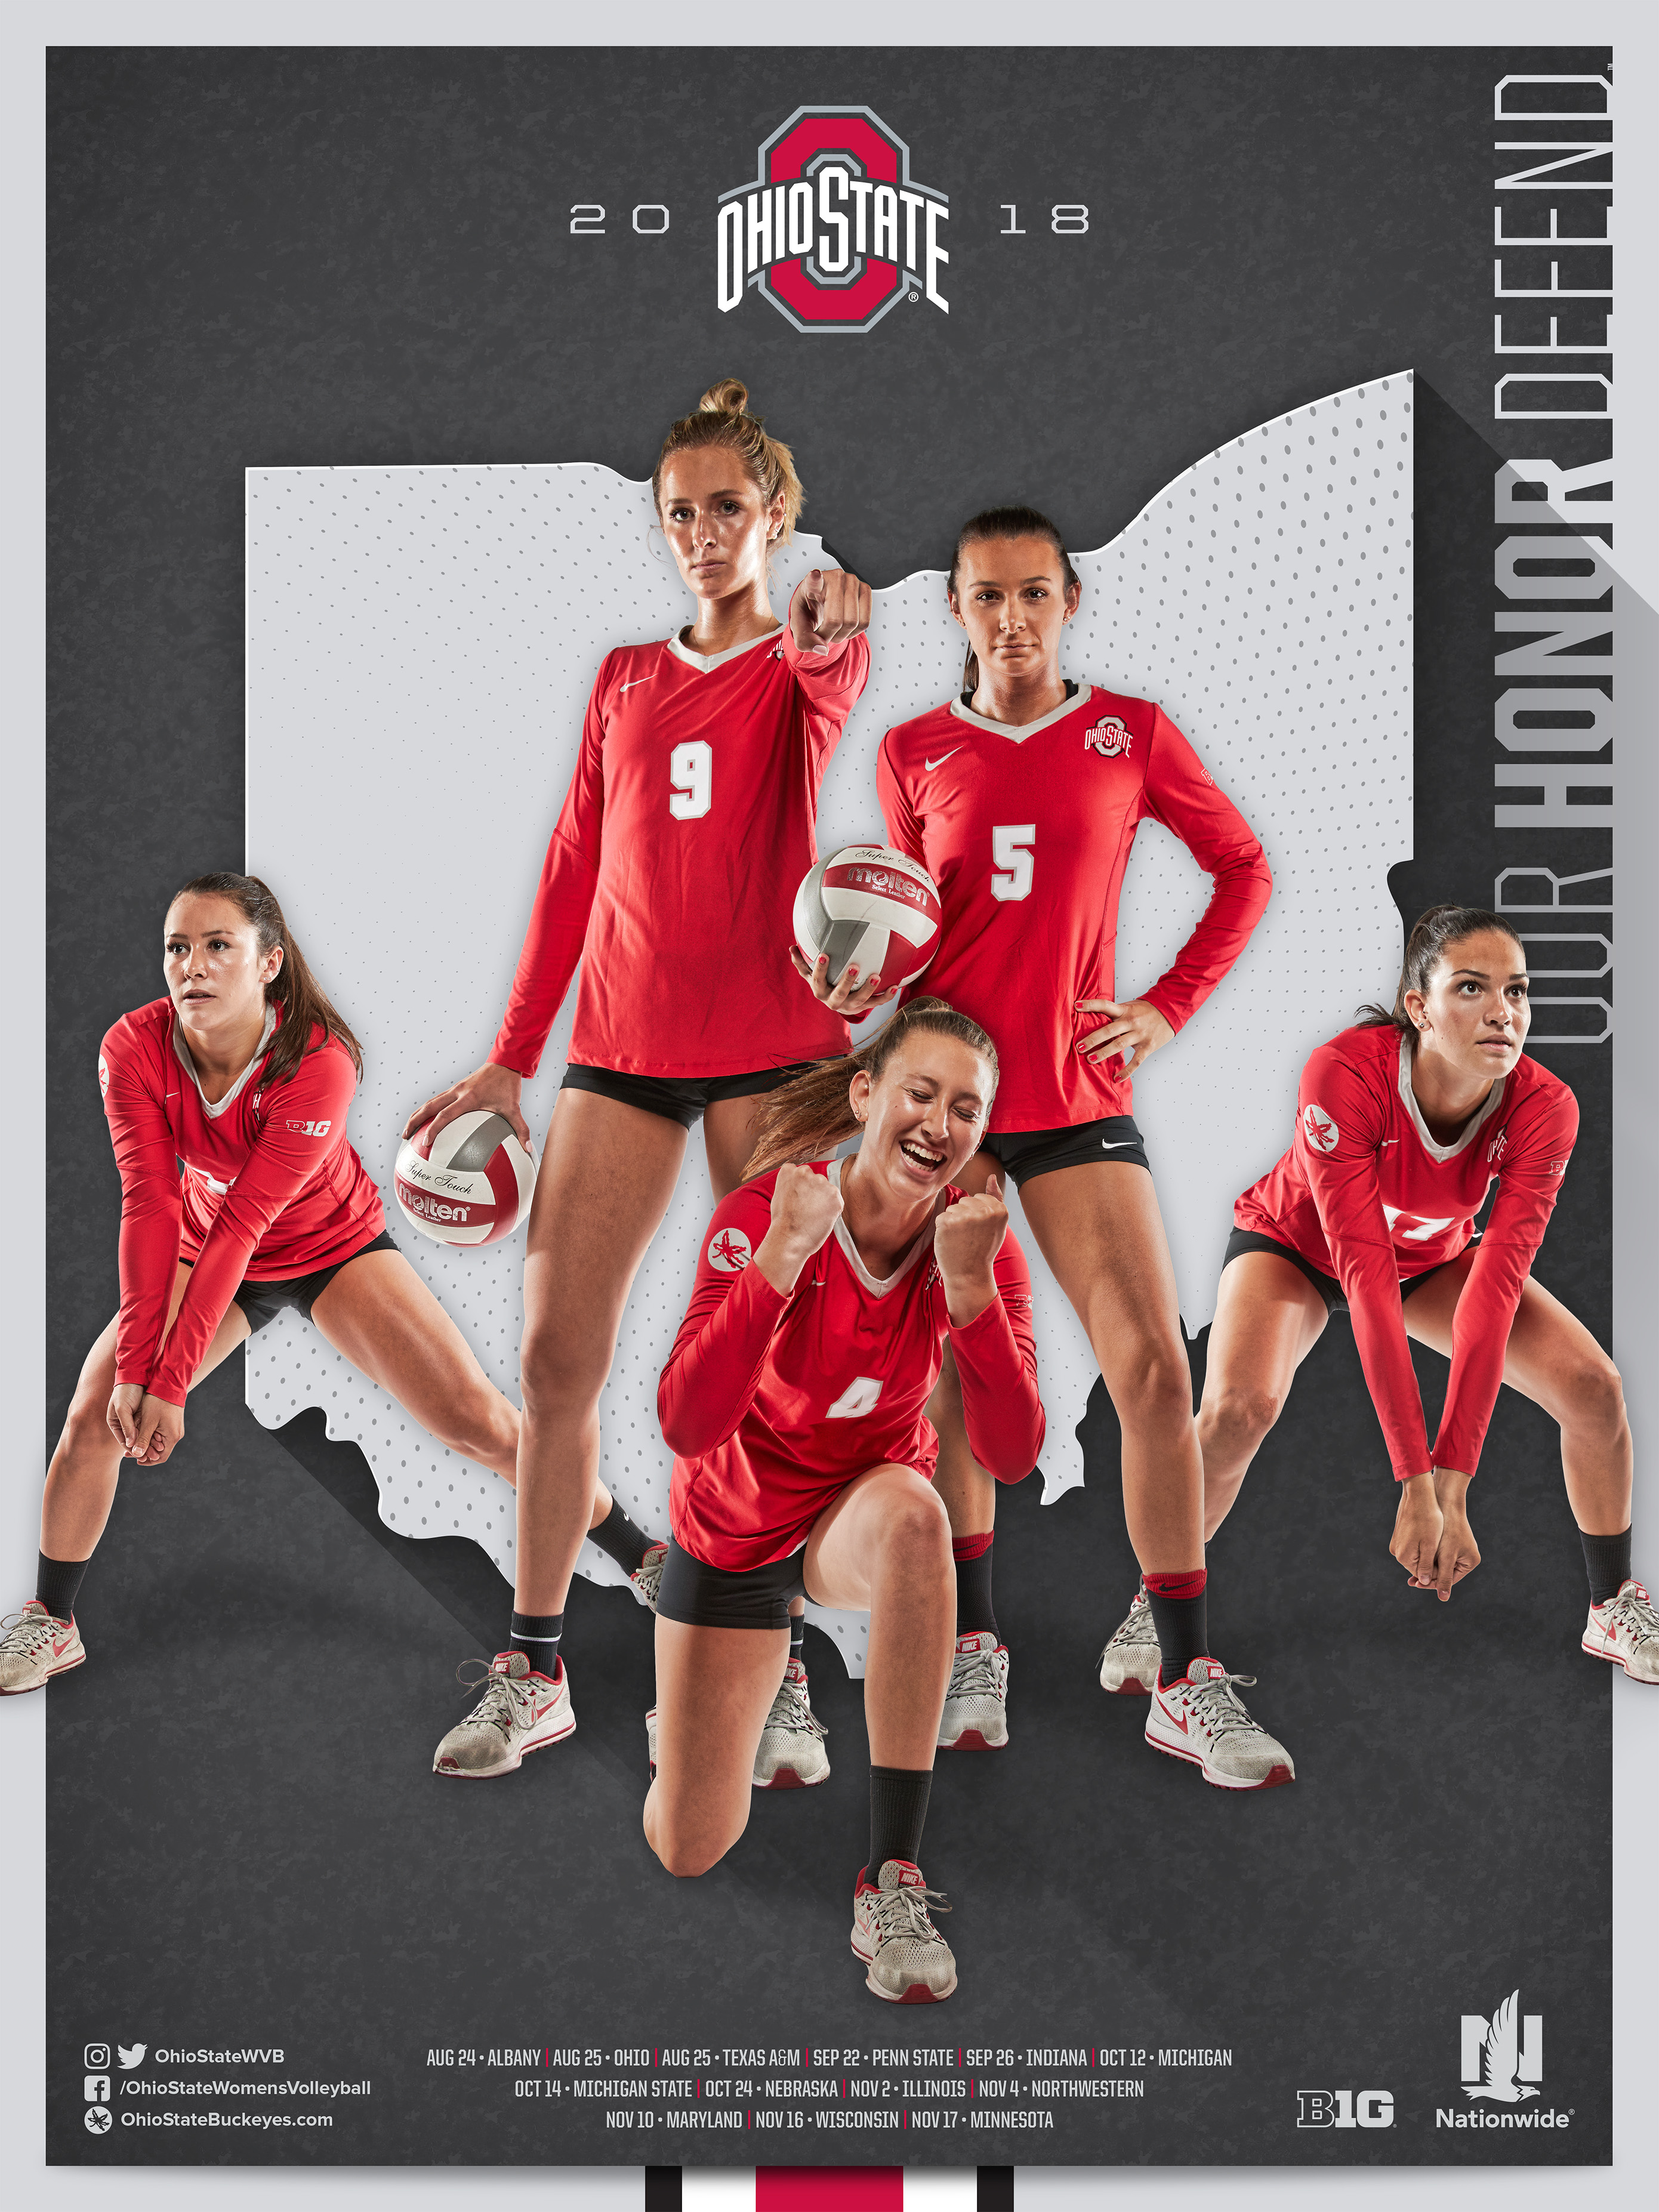 Women's Volleyball - Ohio State Volleyball Jersey , HD Wallpaper & Backgrounds